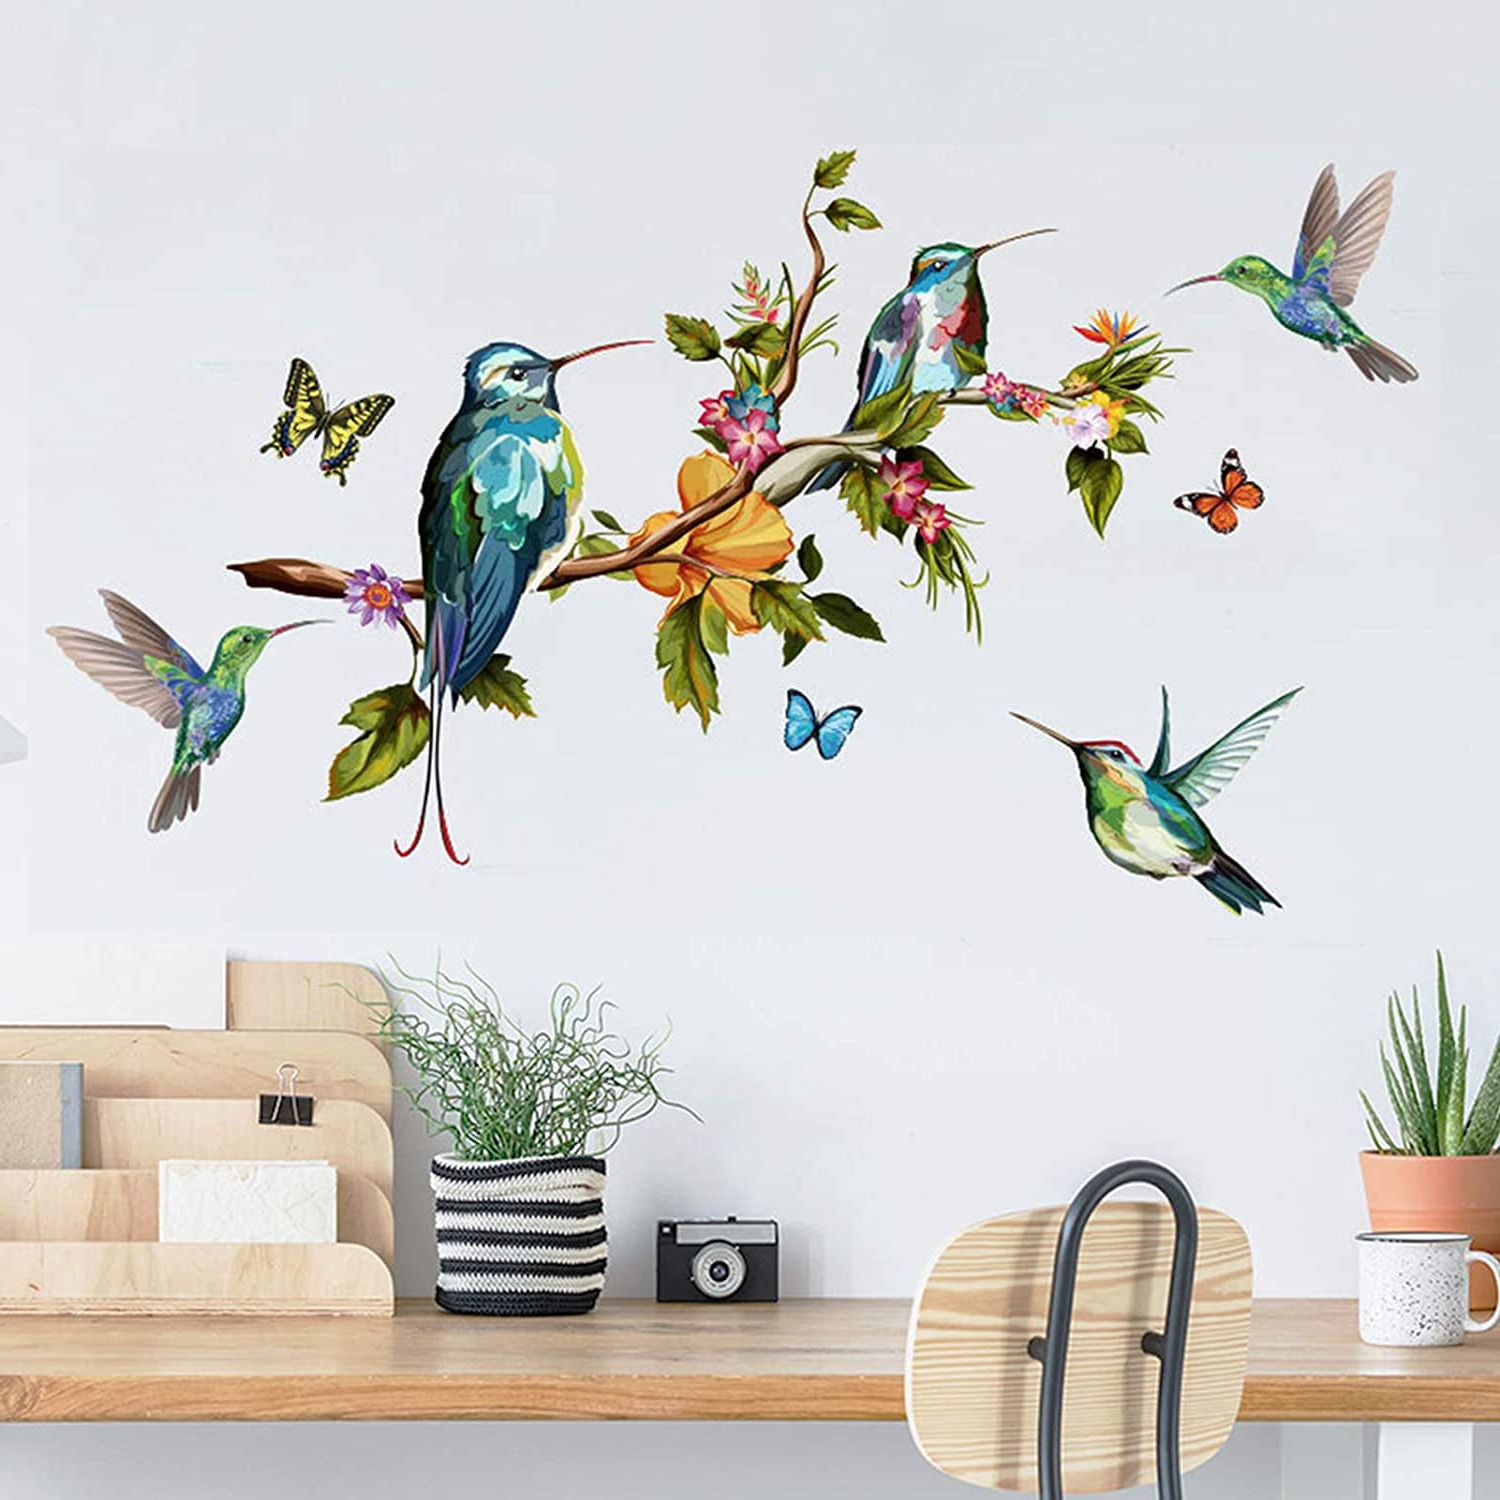 Most Recently Released Hummingbird Wall Art With Regard To Hummingbird Wall Decals For Home, Hummingbirds On Tree Branch Wall Stickers,  Removable Watercolor Birds Butterflies Wall Art Mural Decor Home  Decorations For Bedroom Living Room Office – Walmart (View 6 of 15)